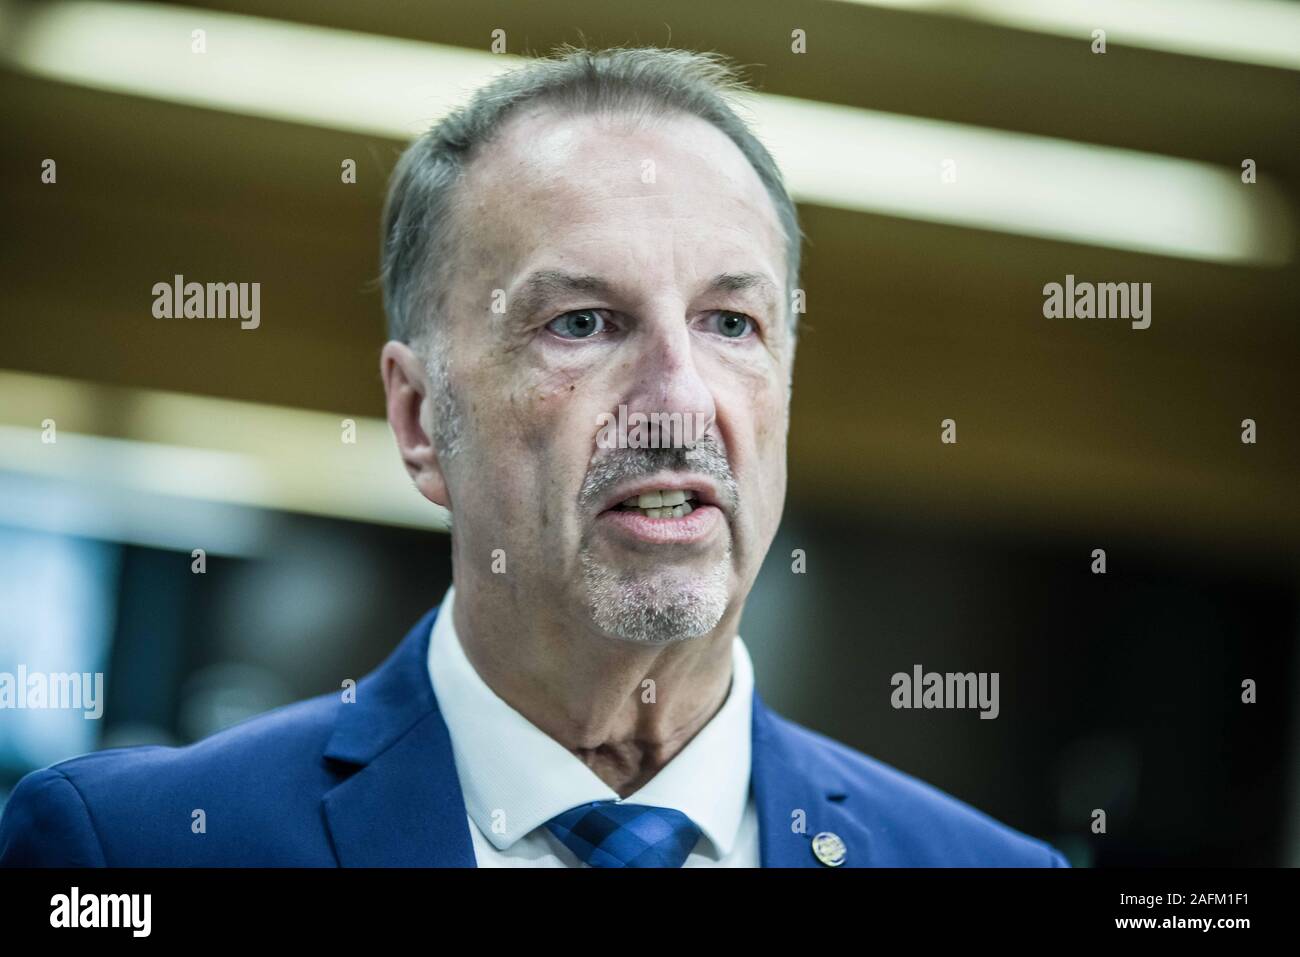 Munich, Bavaria, Germany. 16th Dec, 2019. ROBERT HEIMBERGER, president of the Bayerisches Landeskriminalamt (Bavarian Crime Office). Bavarian Interior Minister Joachim Herrmann, Justice Minister George Eisenreich, Bavarian Landeskriminalamt (Crime Office) preisdent Robert Heimberger, and Bavarian Attorney General Reinhard RÃ¶ttle (Reinhard Roettle) presented the results of the war on organized crime in Bavaria, In 2018 alone, the damages to the state totaled some 169 million Euros, a staggering increase from 2017's figure of 12 million. Processes against organized crime have cost the st Stock Photo